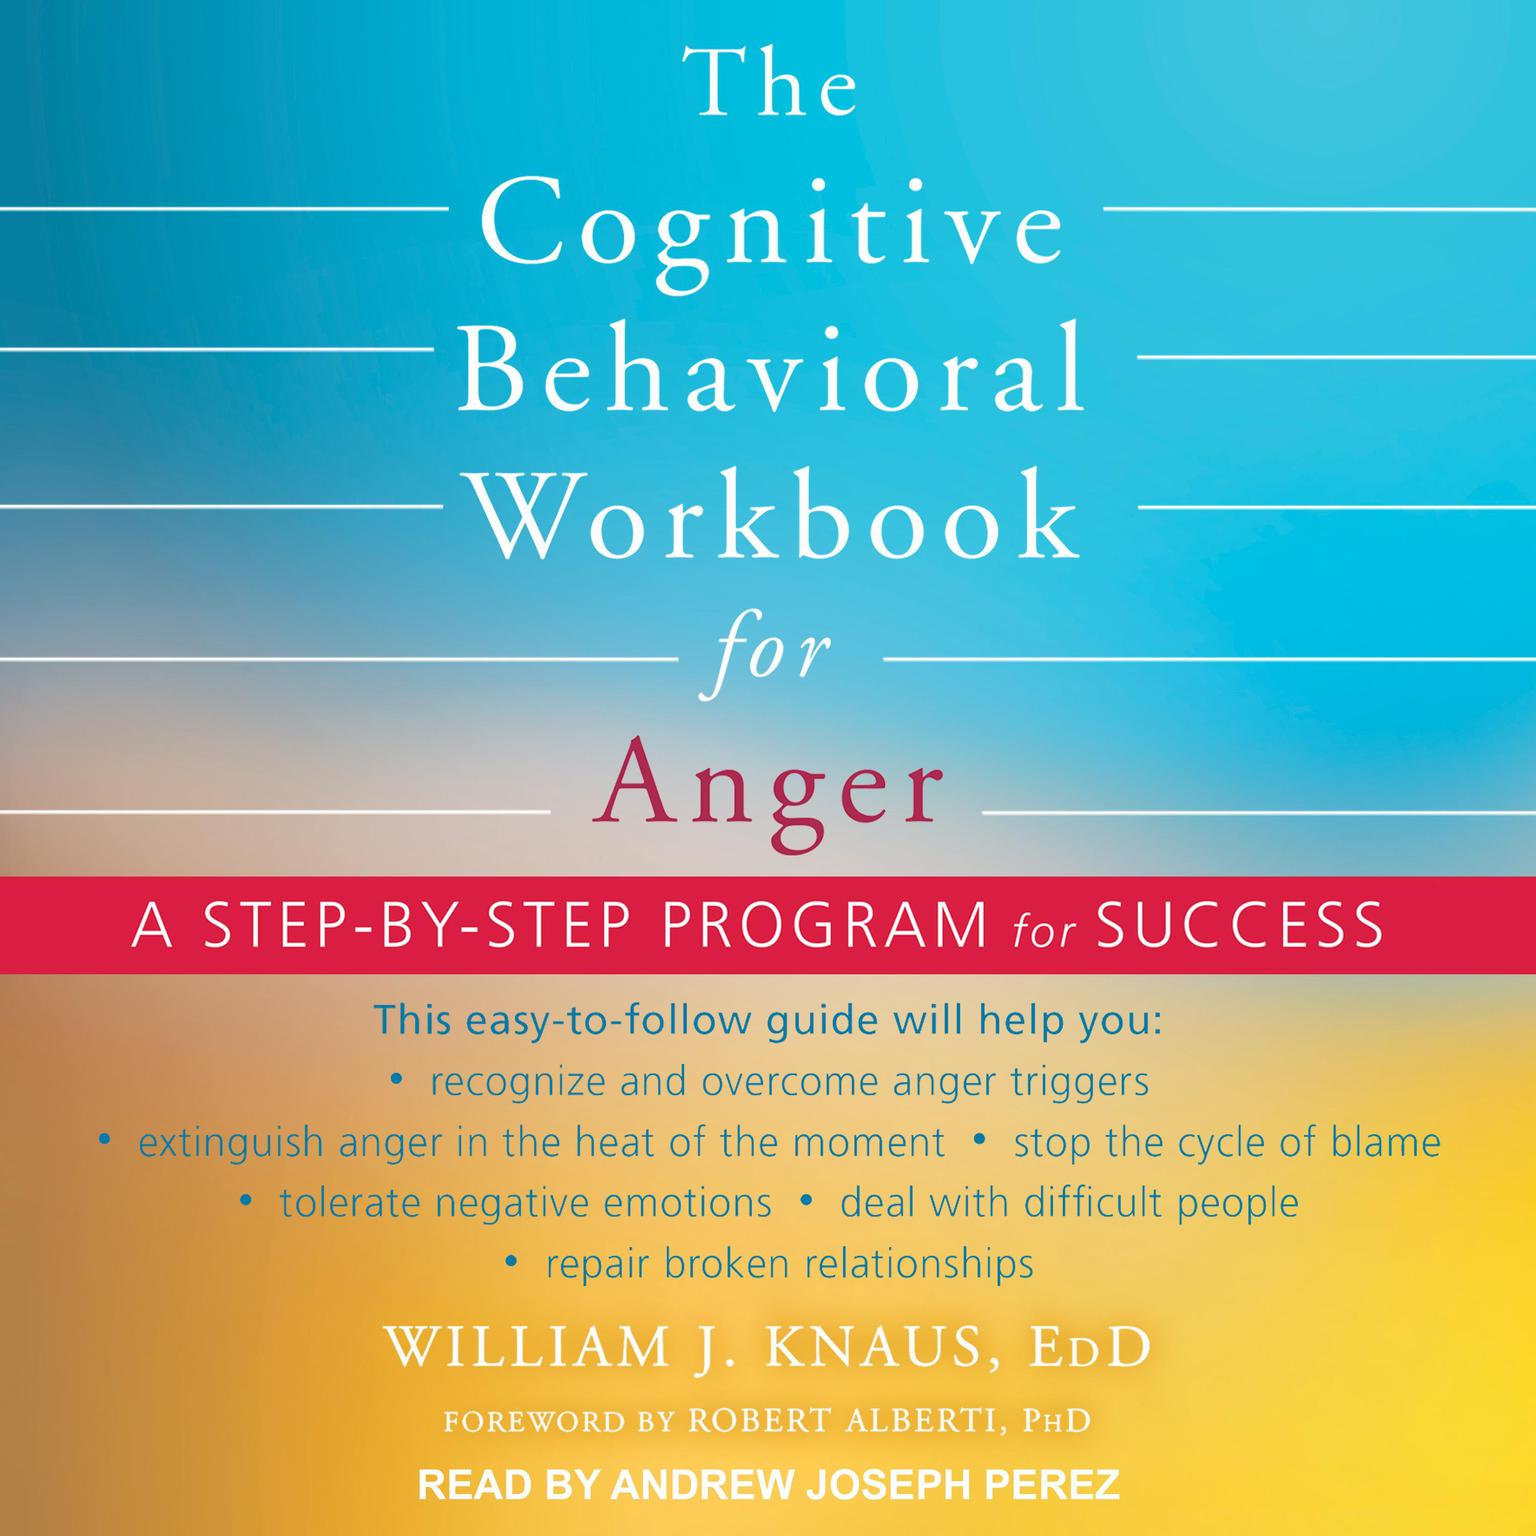 The Cognitive Behavioral Workbook for Anger: A Step-by-Step Program for Success Audiobook, by William J. Knaus